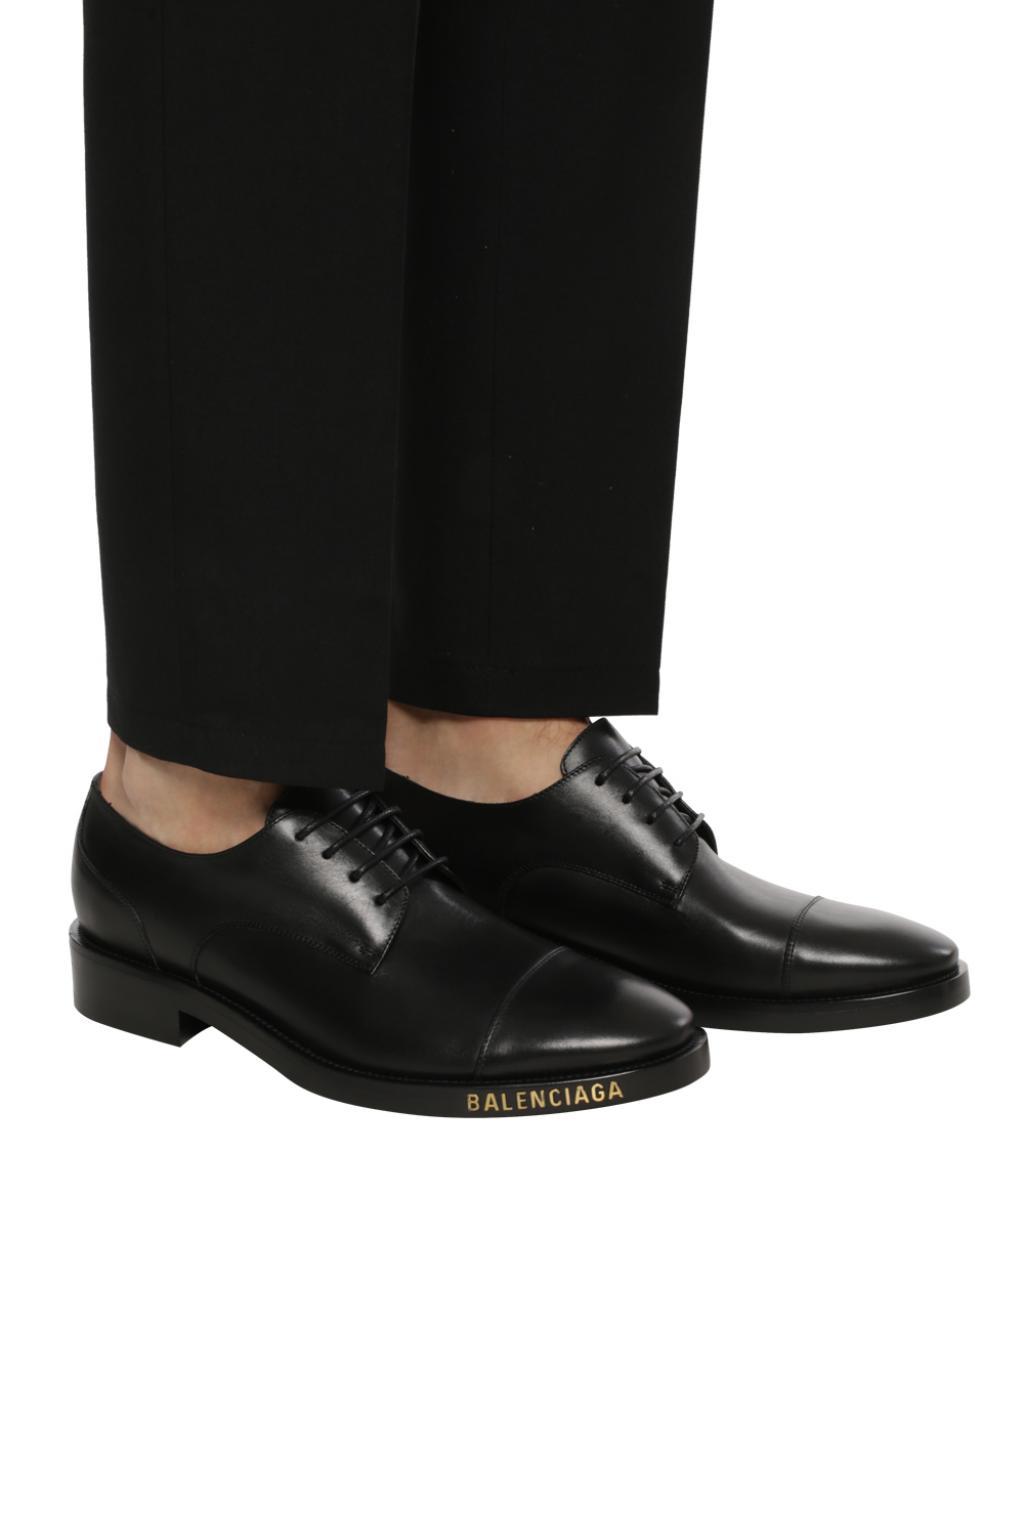 Balenciaga Leather Shoes in Black for Men - Lyst